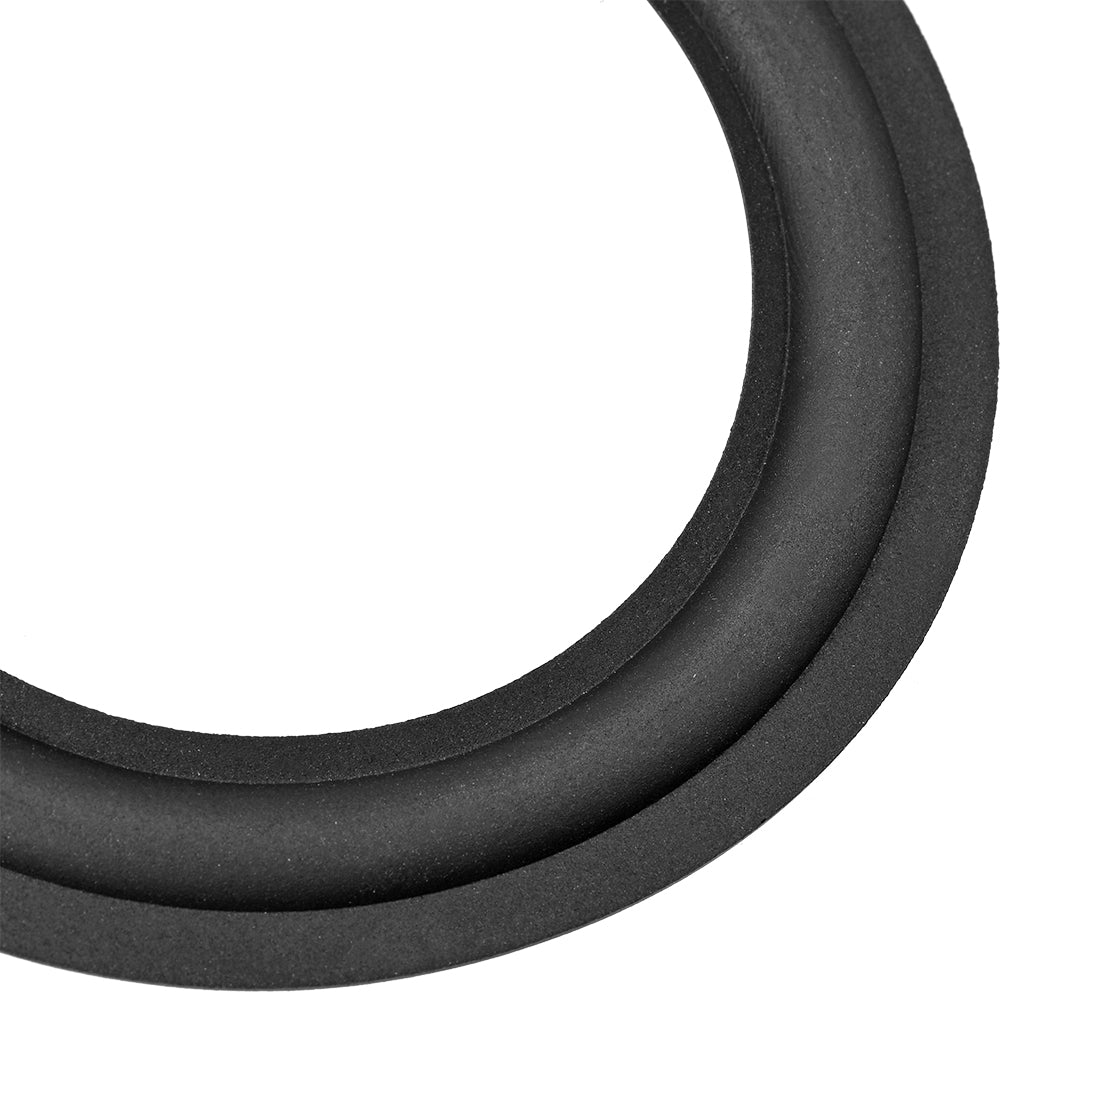 uxcell Uxcell 4.5" 4.5 inch Speaker Rubber Edge Surround Rings Replacement Part for Speaker Repair or DIY